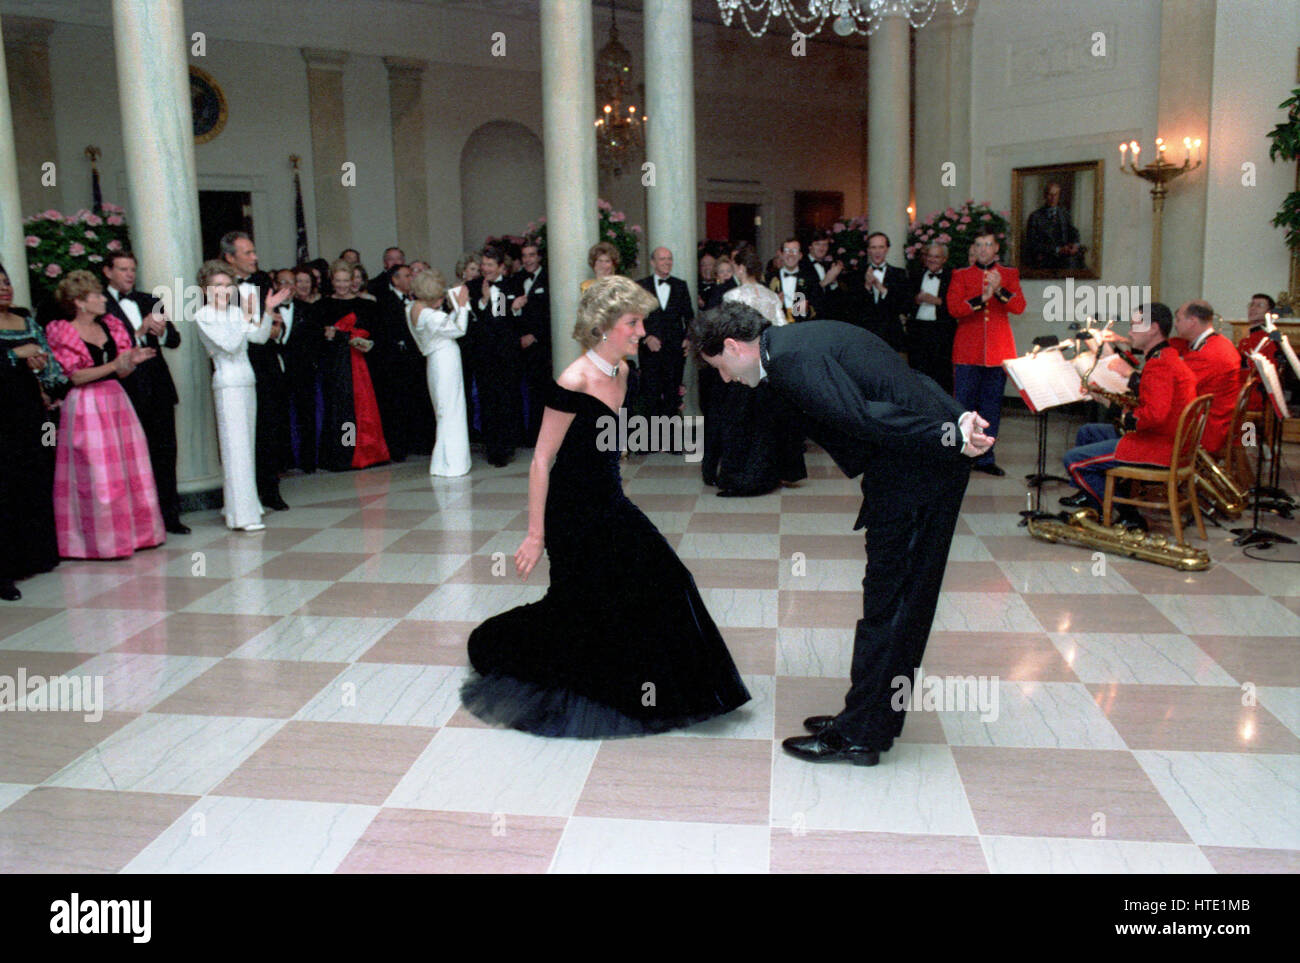 Princess Diana dances with John Travolta in the Cross Hall of the White House in Washington, D.C at a Dinner for Prince Charles and Princess Diana of the United Kingdom on November 9, 1985 Mandatory Stock Photo